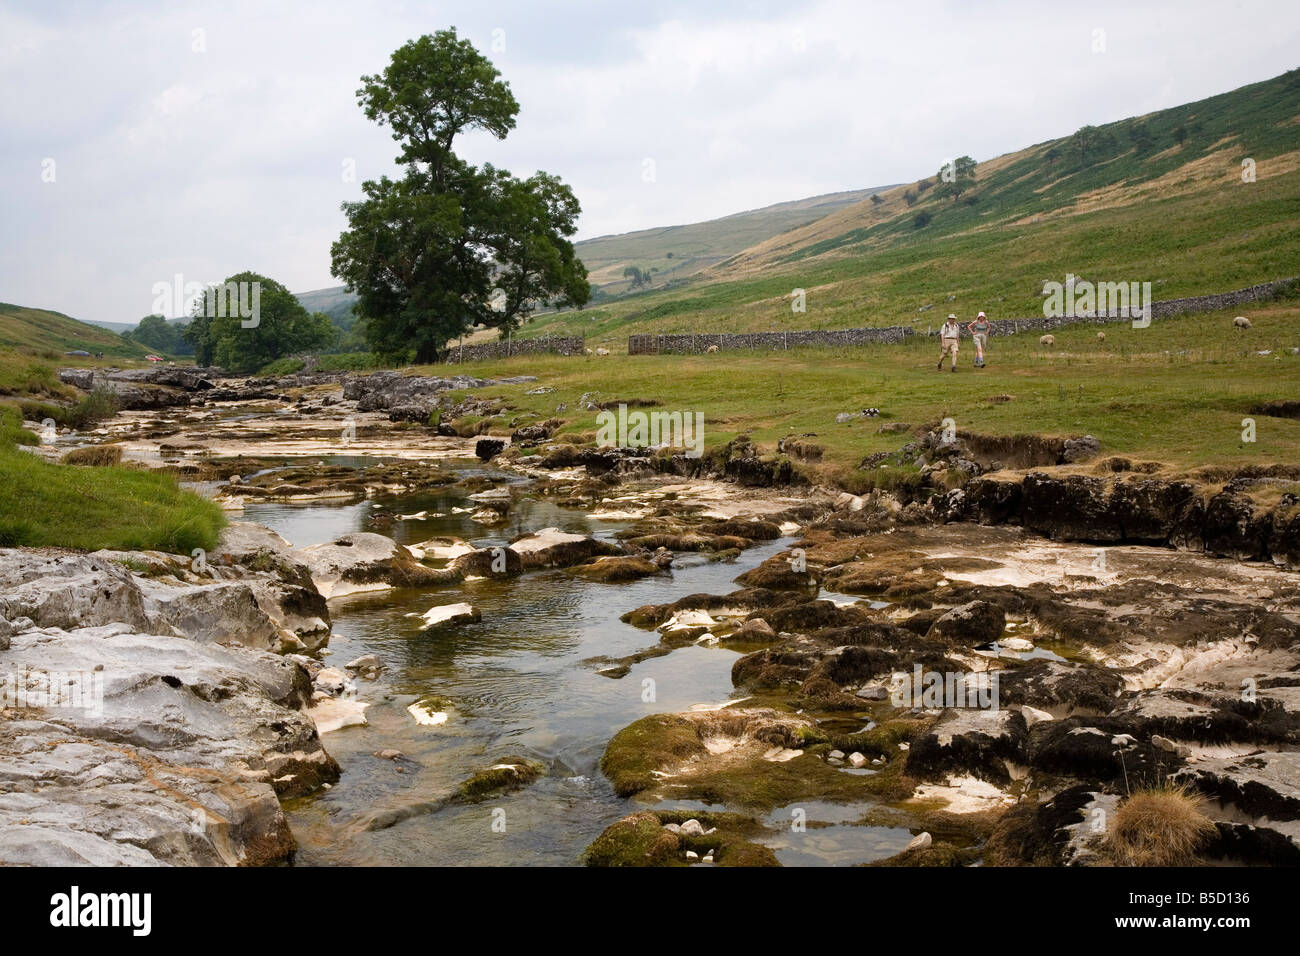 River Wharfe, Upper Wharfedale (Langstrothdale), near Hubberholme, Yorkshire Dales National Park, North Yorkshire, England Stock Photo